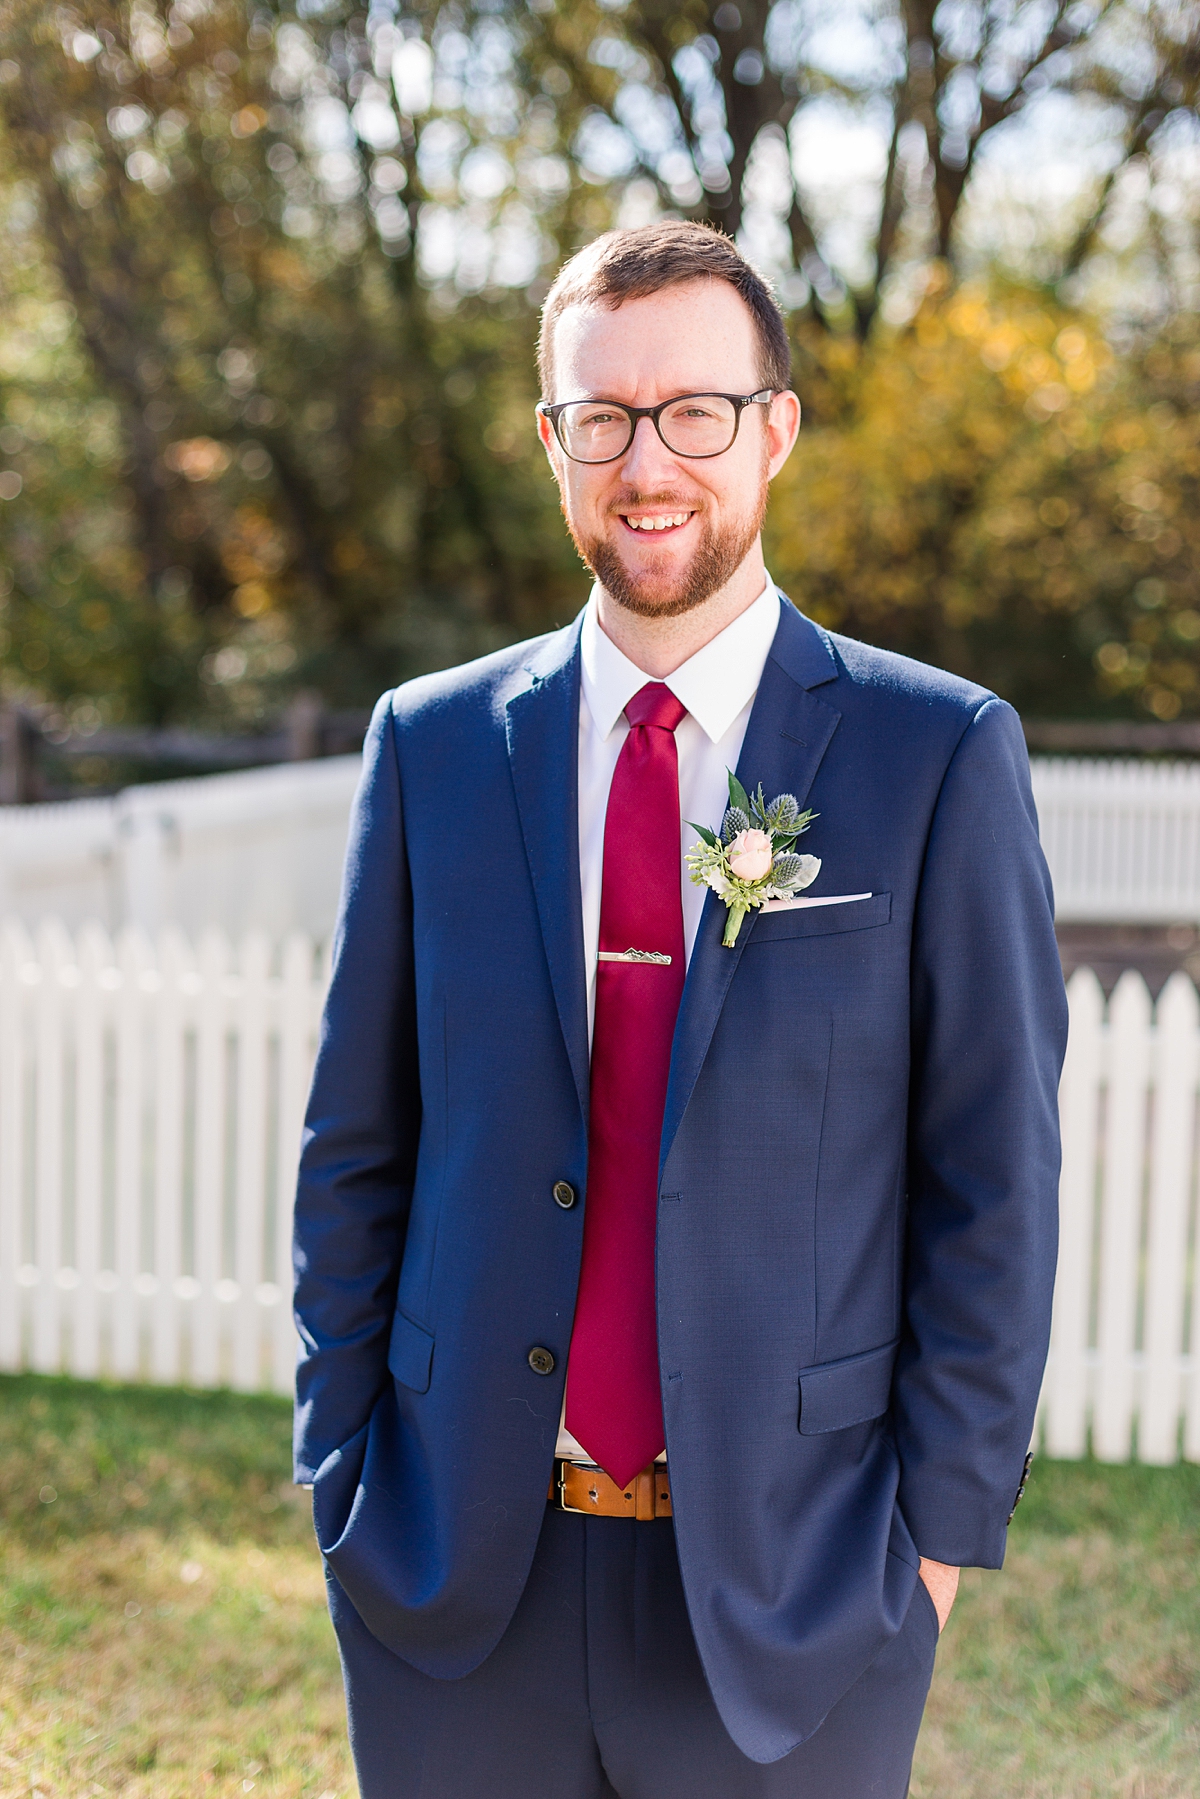 Groom Portraits at Hanover Tavern Fall Wedding. Wedding Photography by Richmond Wedding Photographer Kailey Brianne Photography. Florals by Lavender Lane Flowers & Gifts